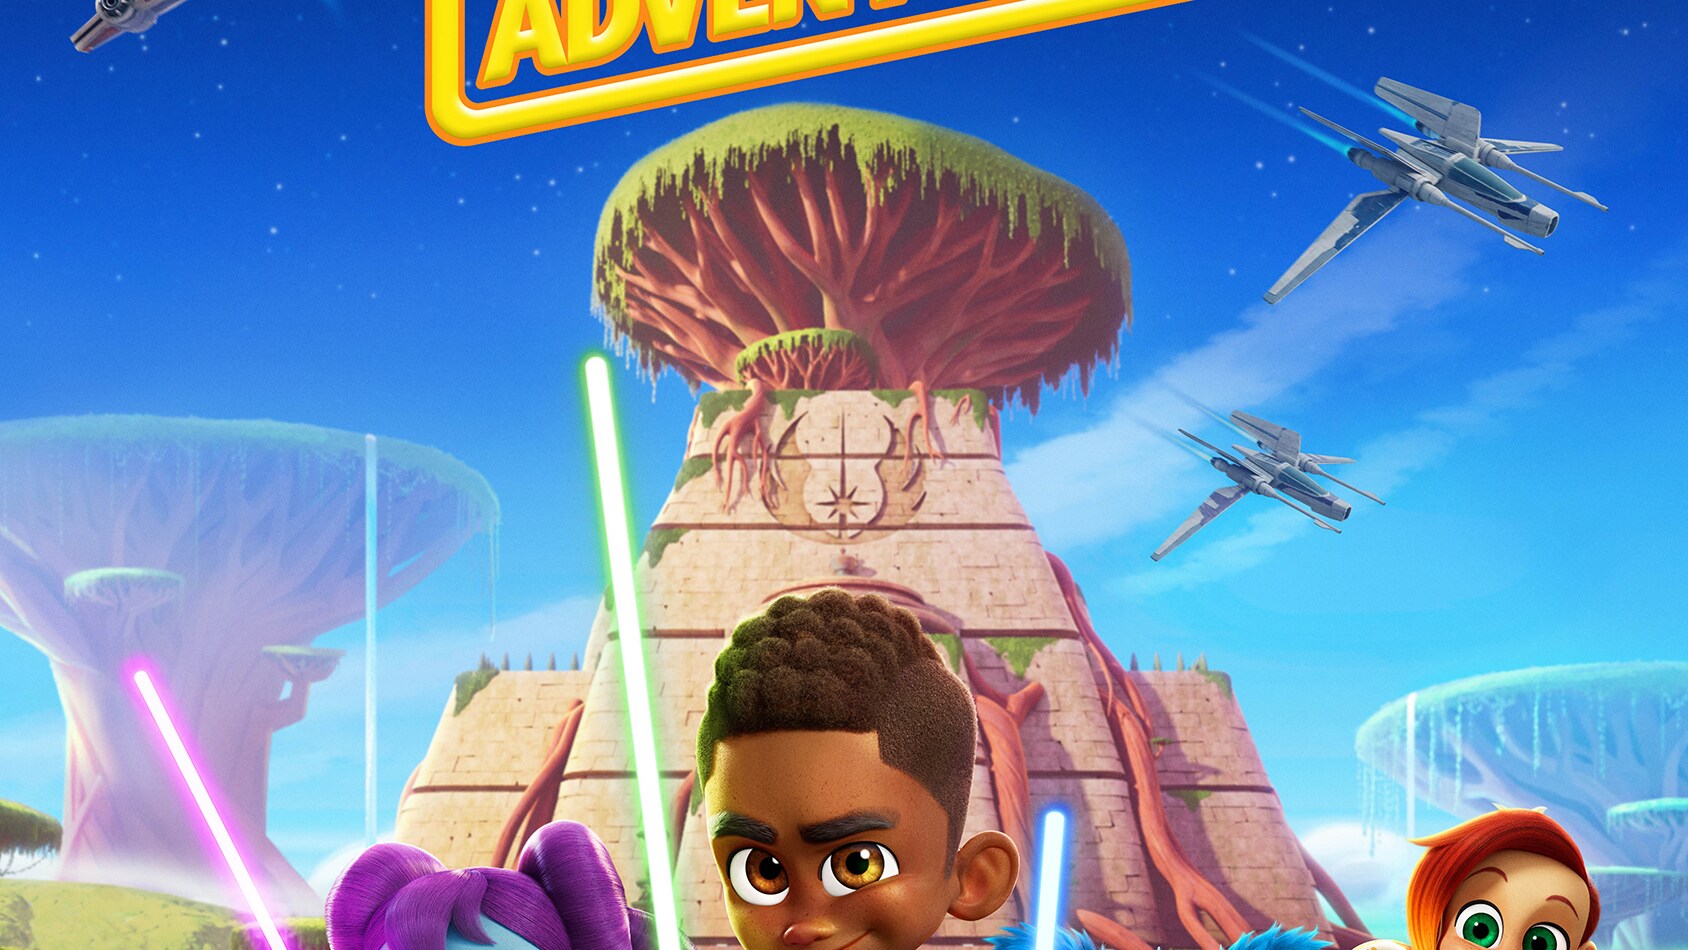 Star Wars: Young Jedi Adventures poster.